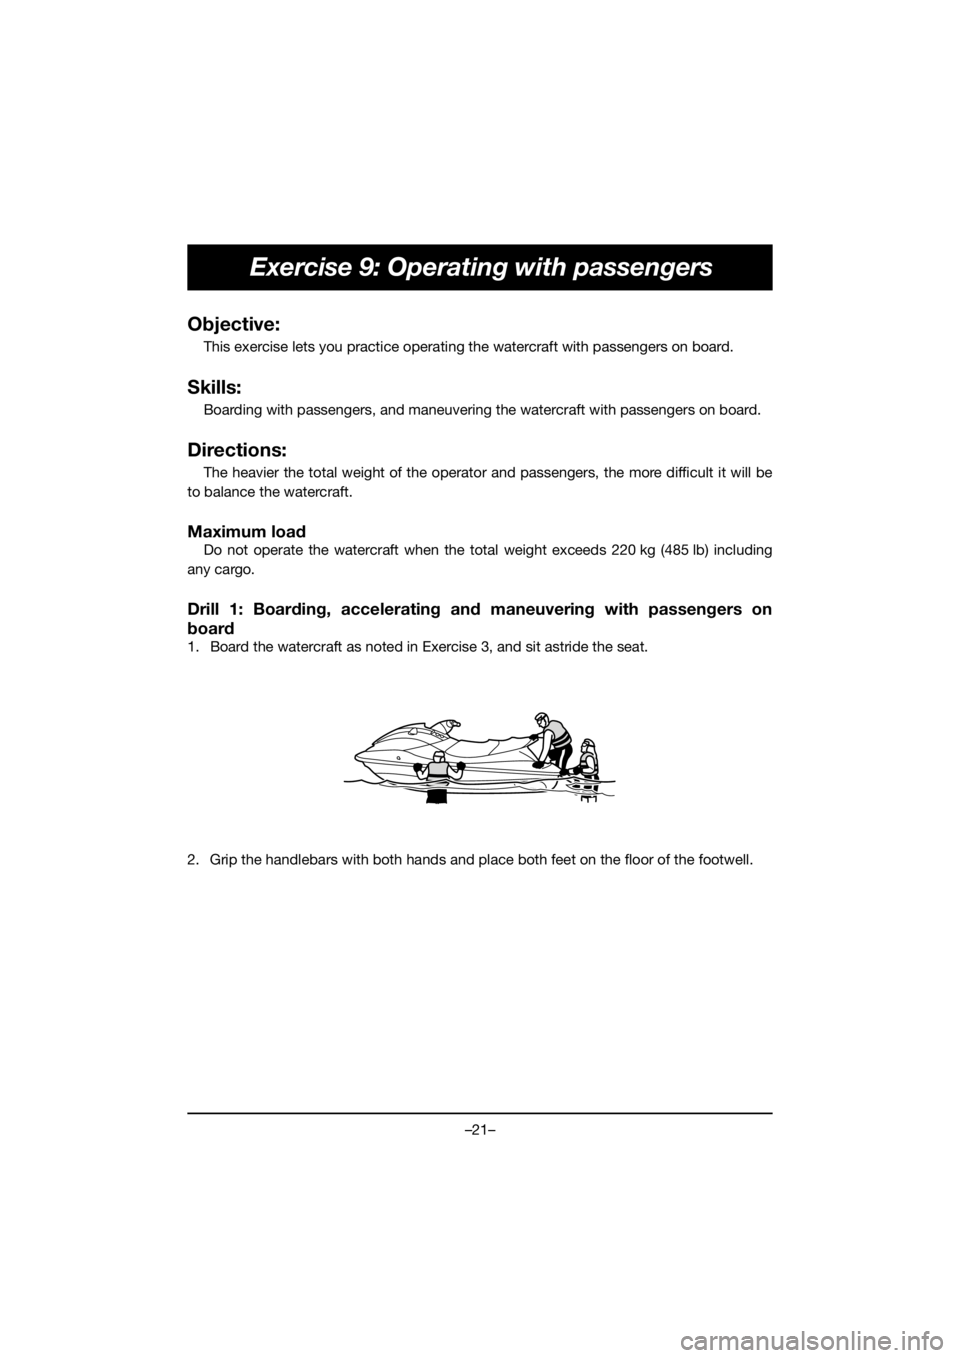 YAMAHA EX 2019  Betriebsanleitungen (in German) –21–
Exercise 9: Operating with passengers
Objective:
This exercise lets you practice operating the watercraft with passengers on board.
Skills:
Boarding with passengers, and maneuvering the water